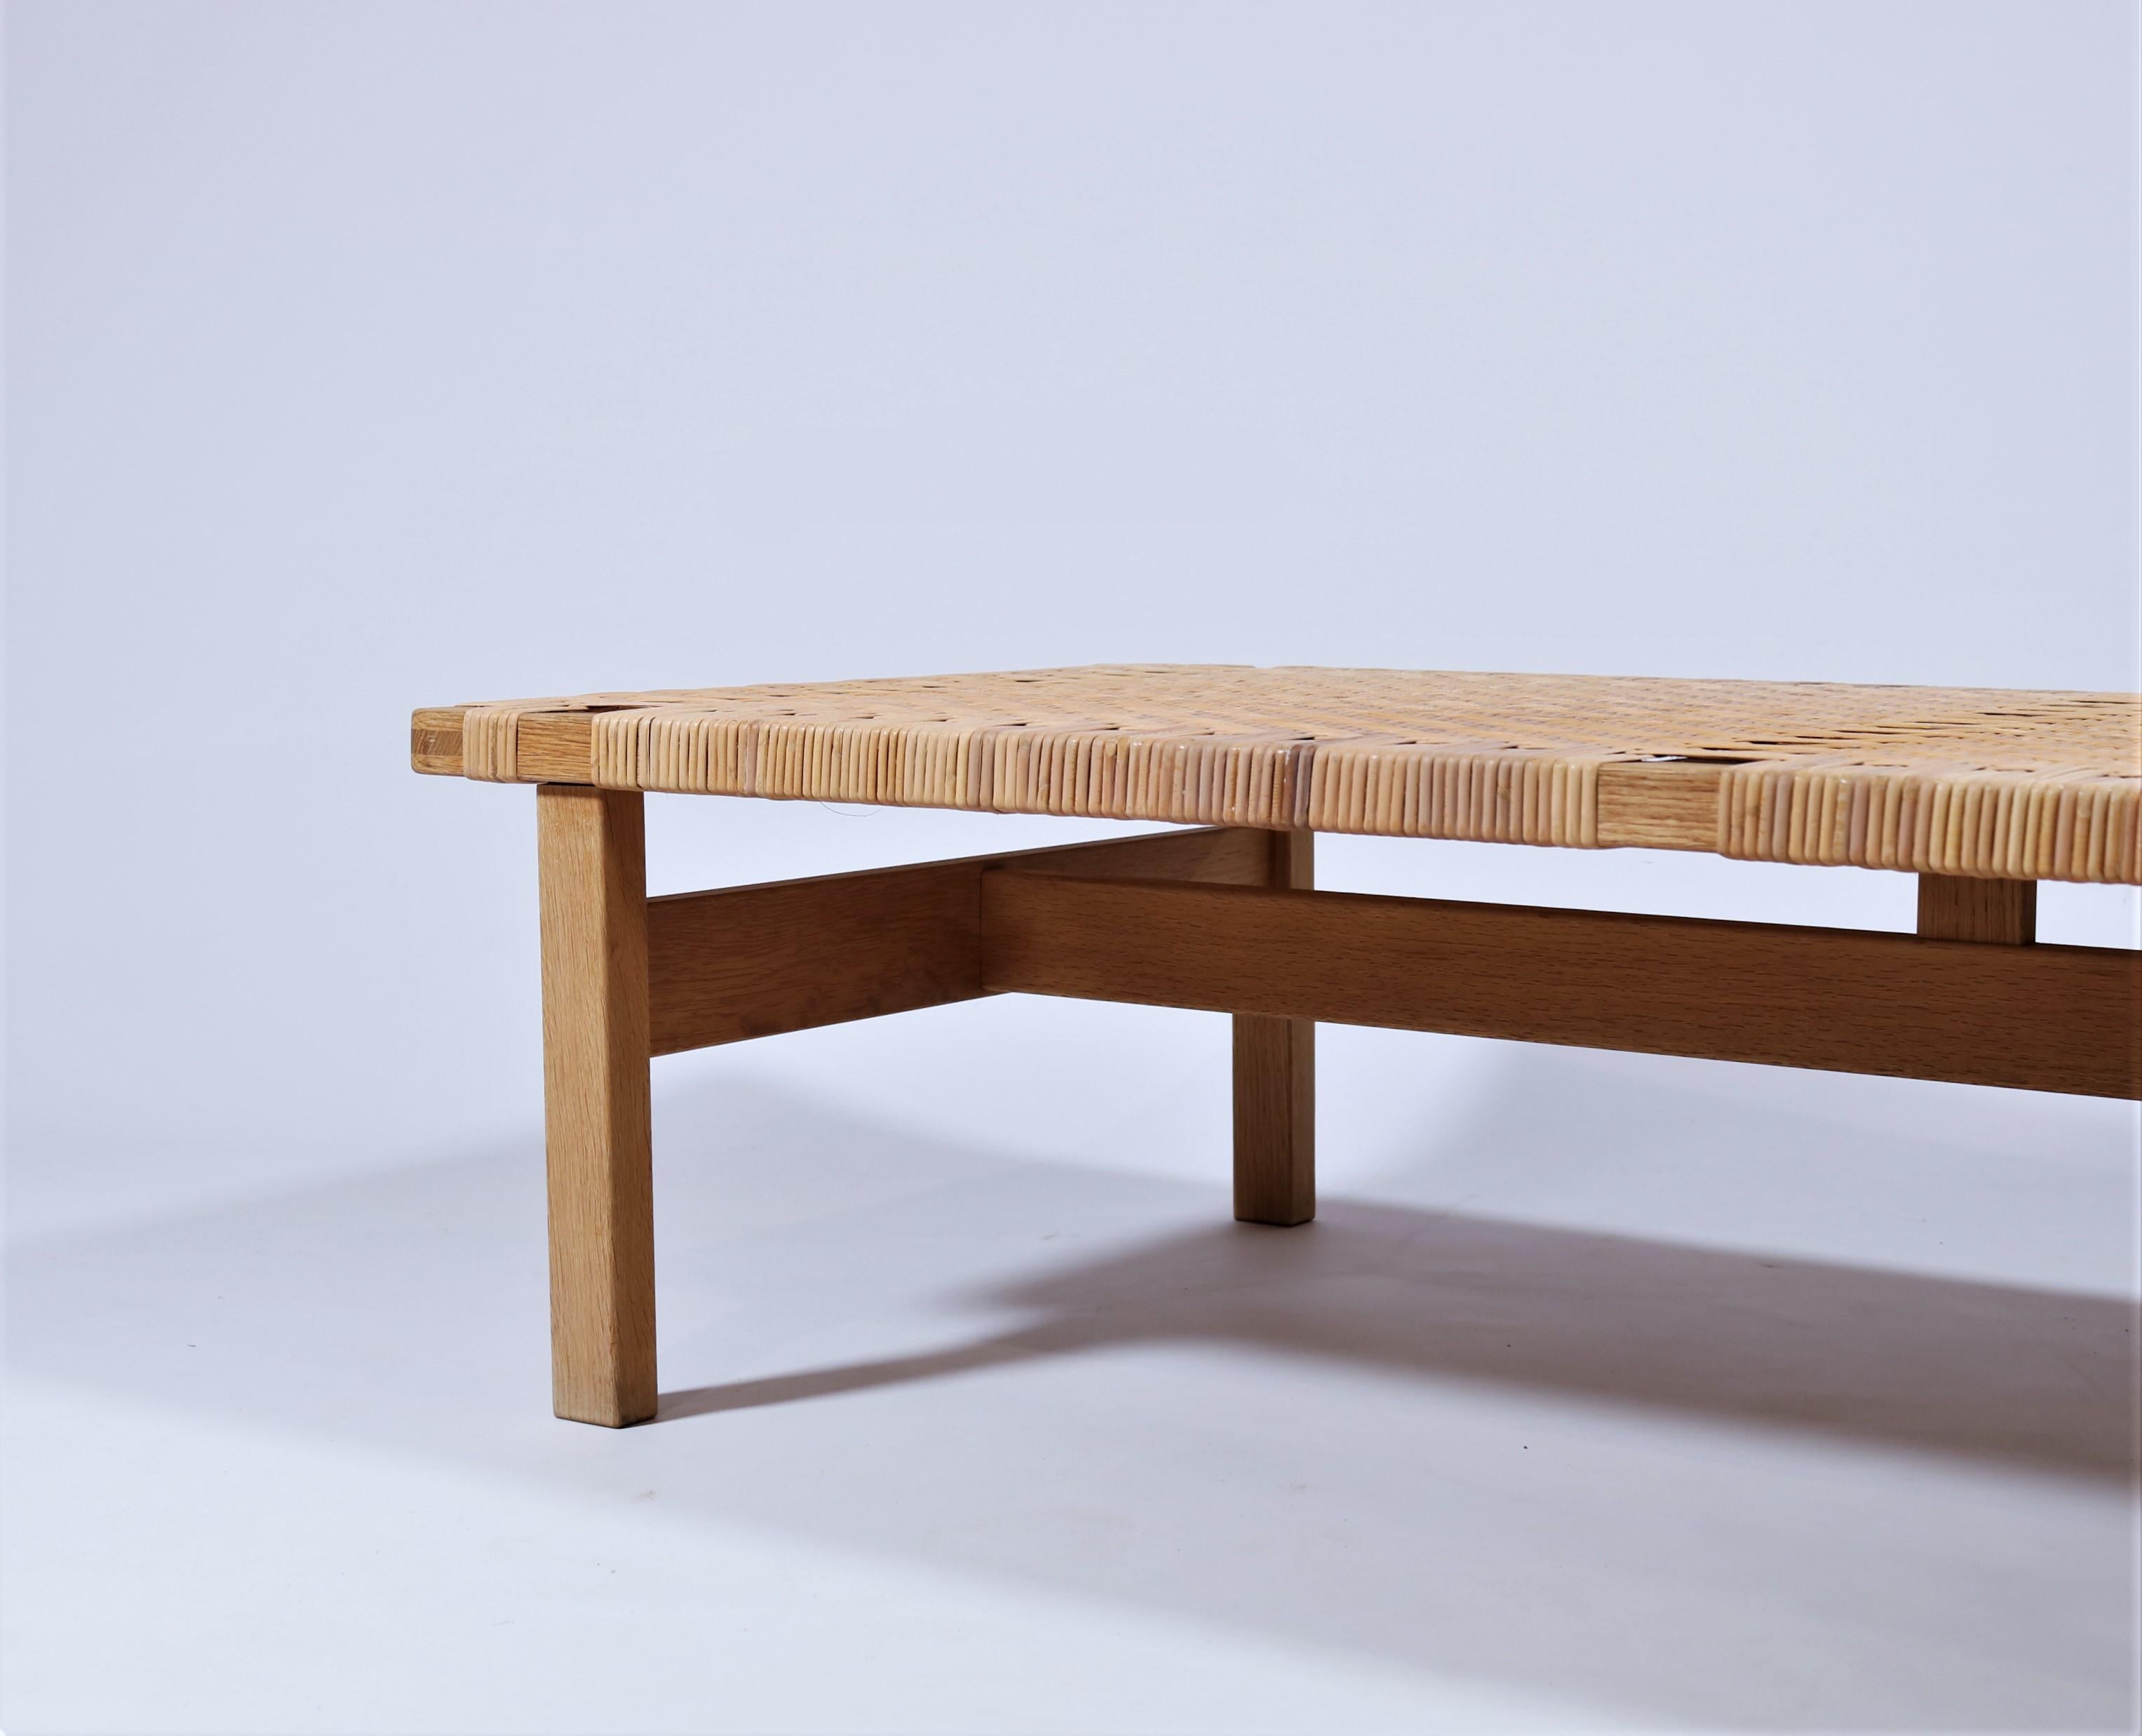 Beautiful bench in solid oak and handwoven rattan cane by Danish architect Borge Mogensen. This piece of furniture is a stunning addition to any interior and can be used both as a low side table and a bench. Mogensen designed the bench in the 1950s